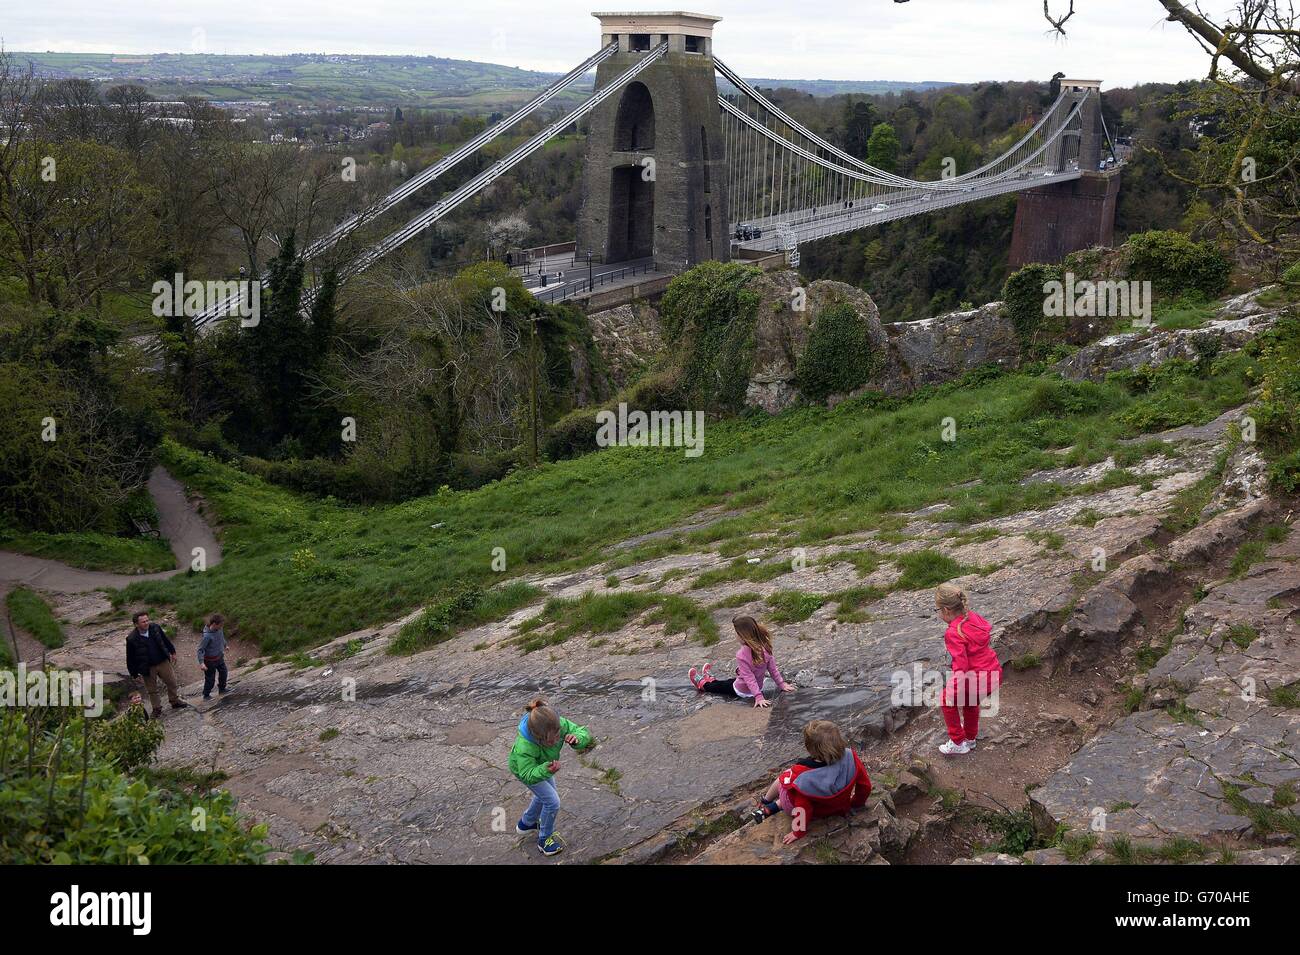 Children slide down a rock seam, worn smooth by repeated use, on the side of a hill, overlooking Clifton Suspension Bridge, Bristol. Stock Photo